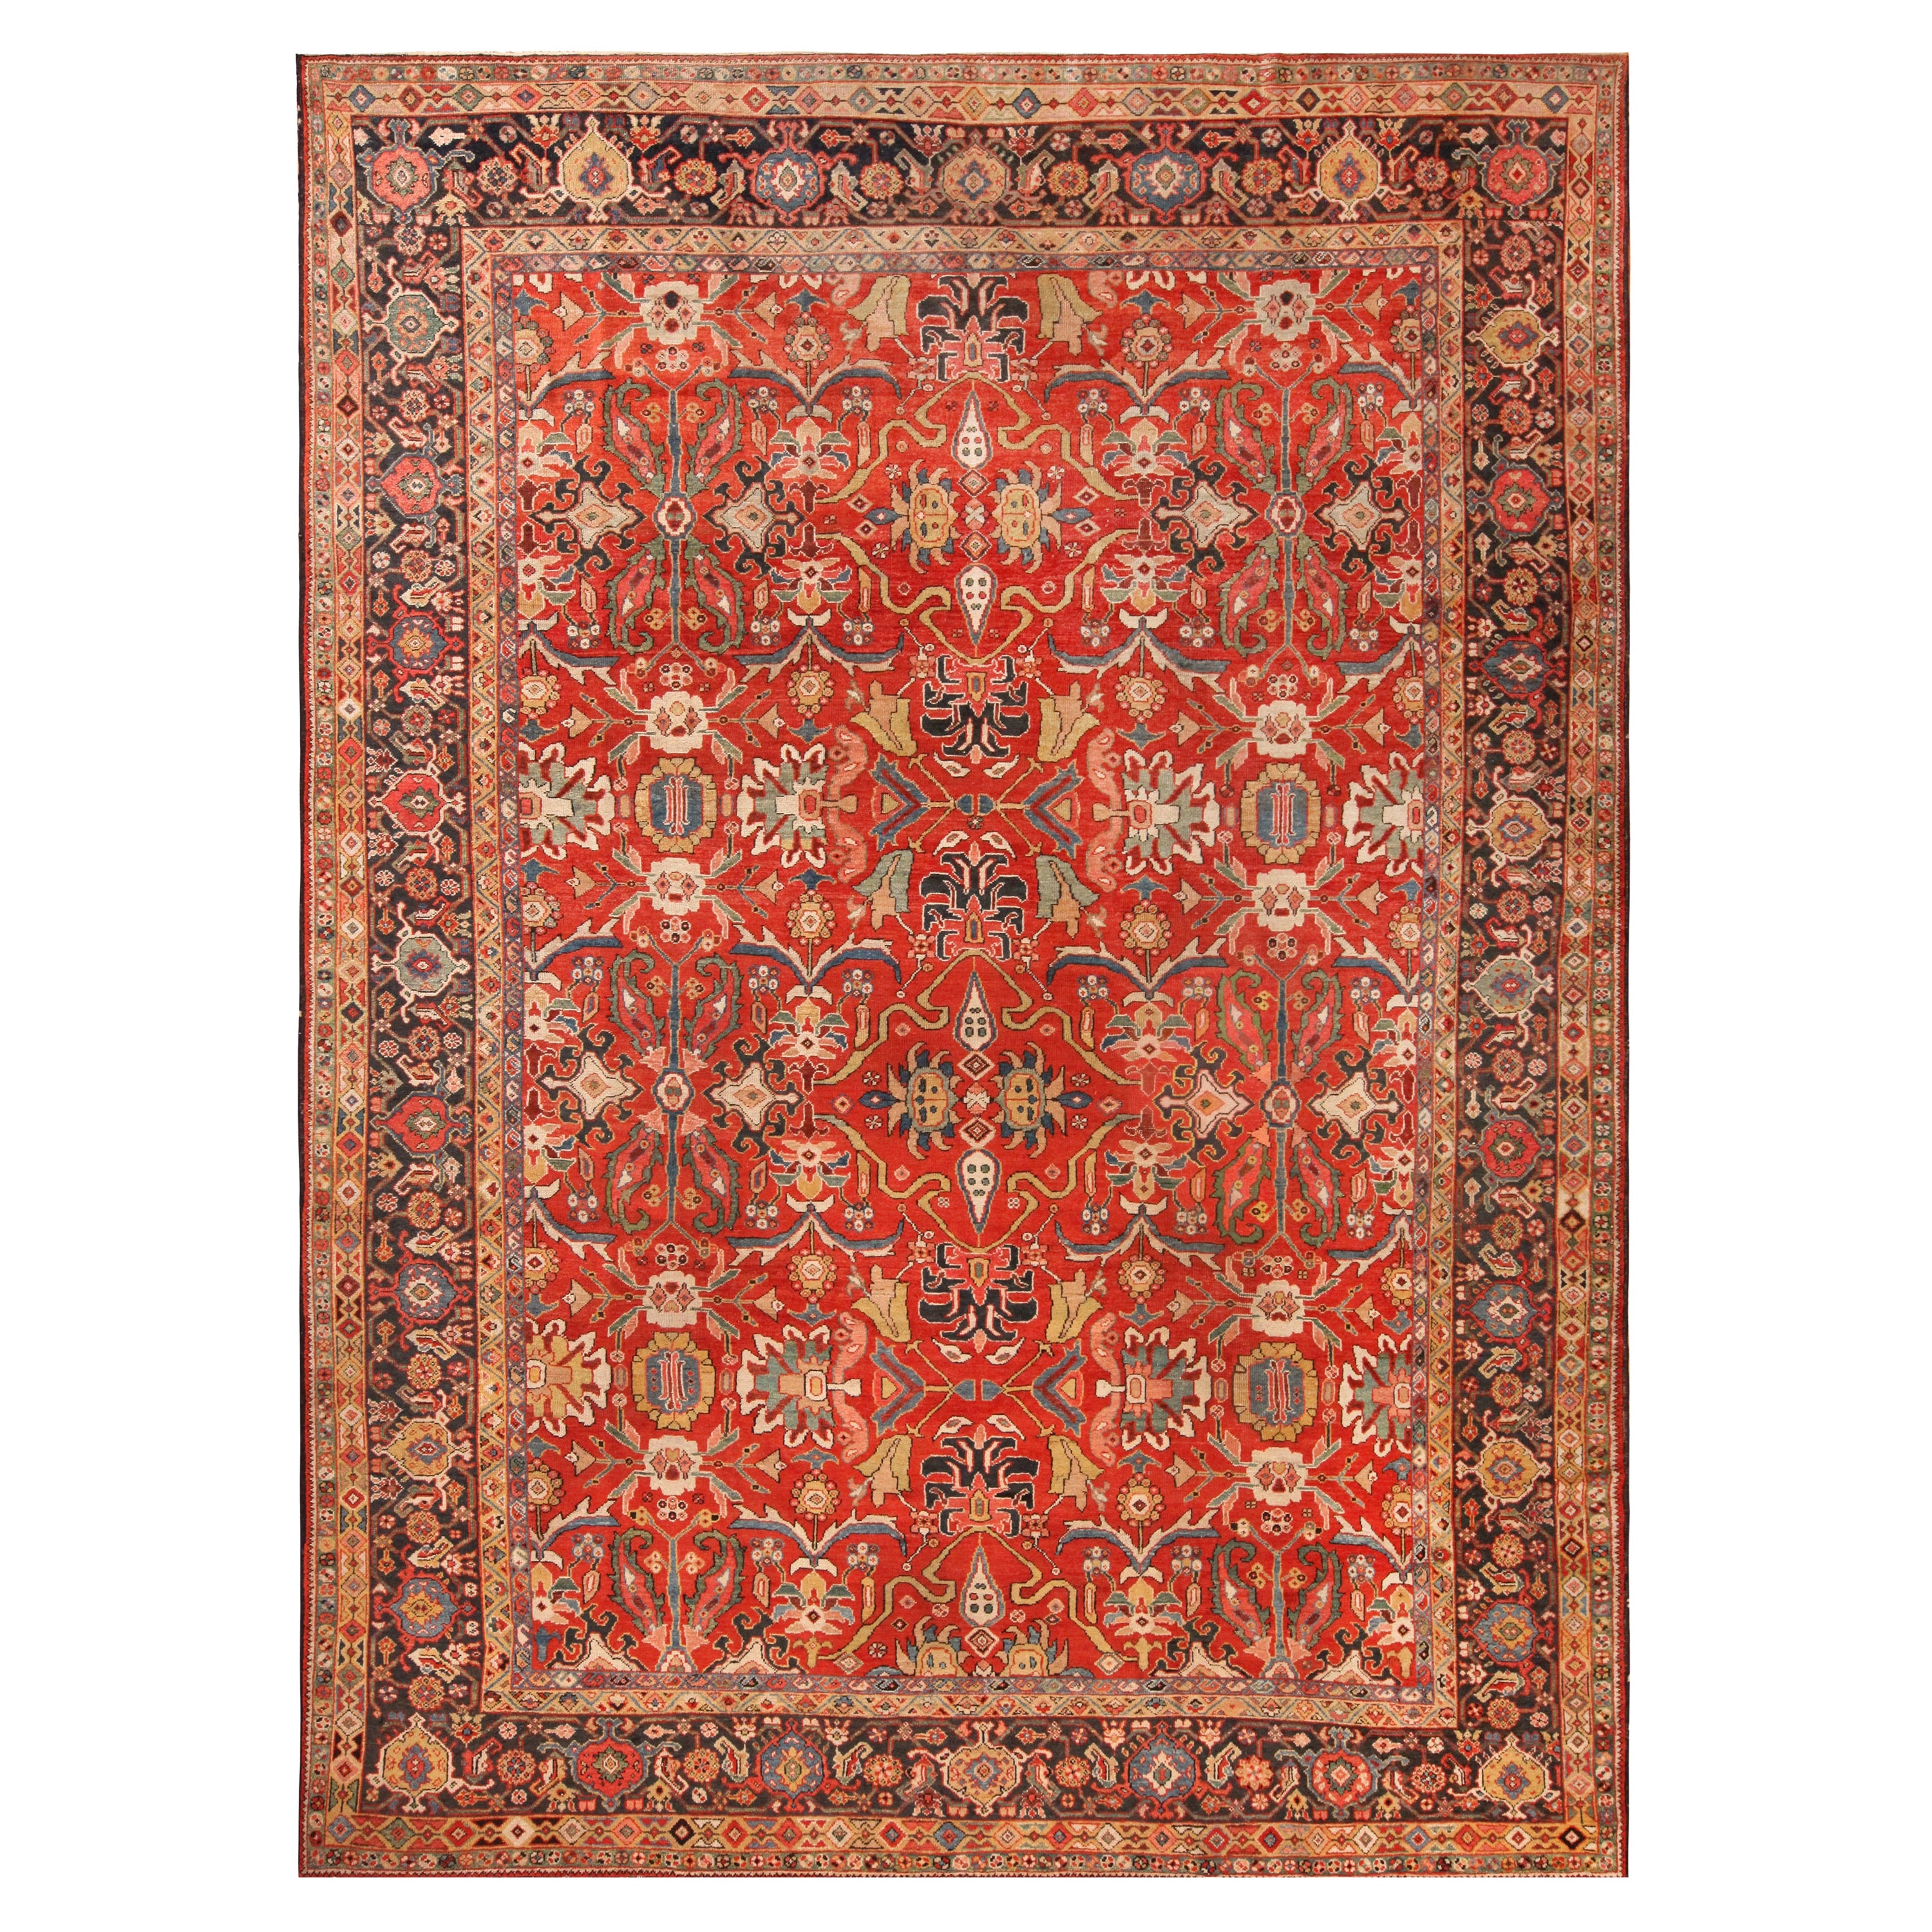 Tapis persan ancien Sultanabad rouge. 10 pieds x 14 pieds